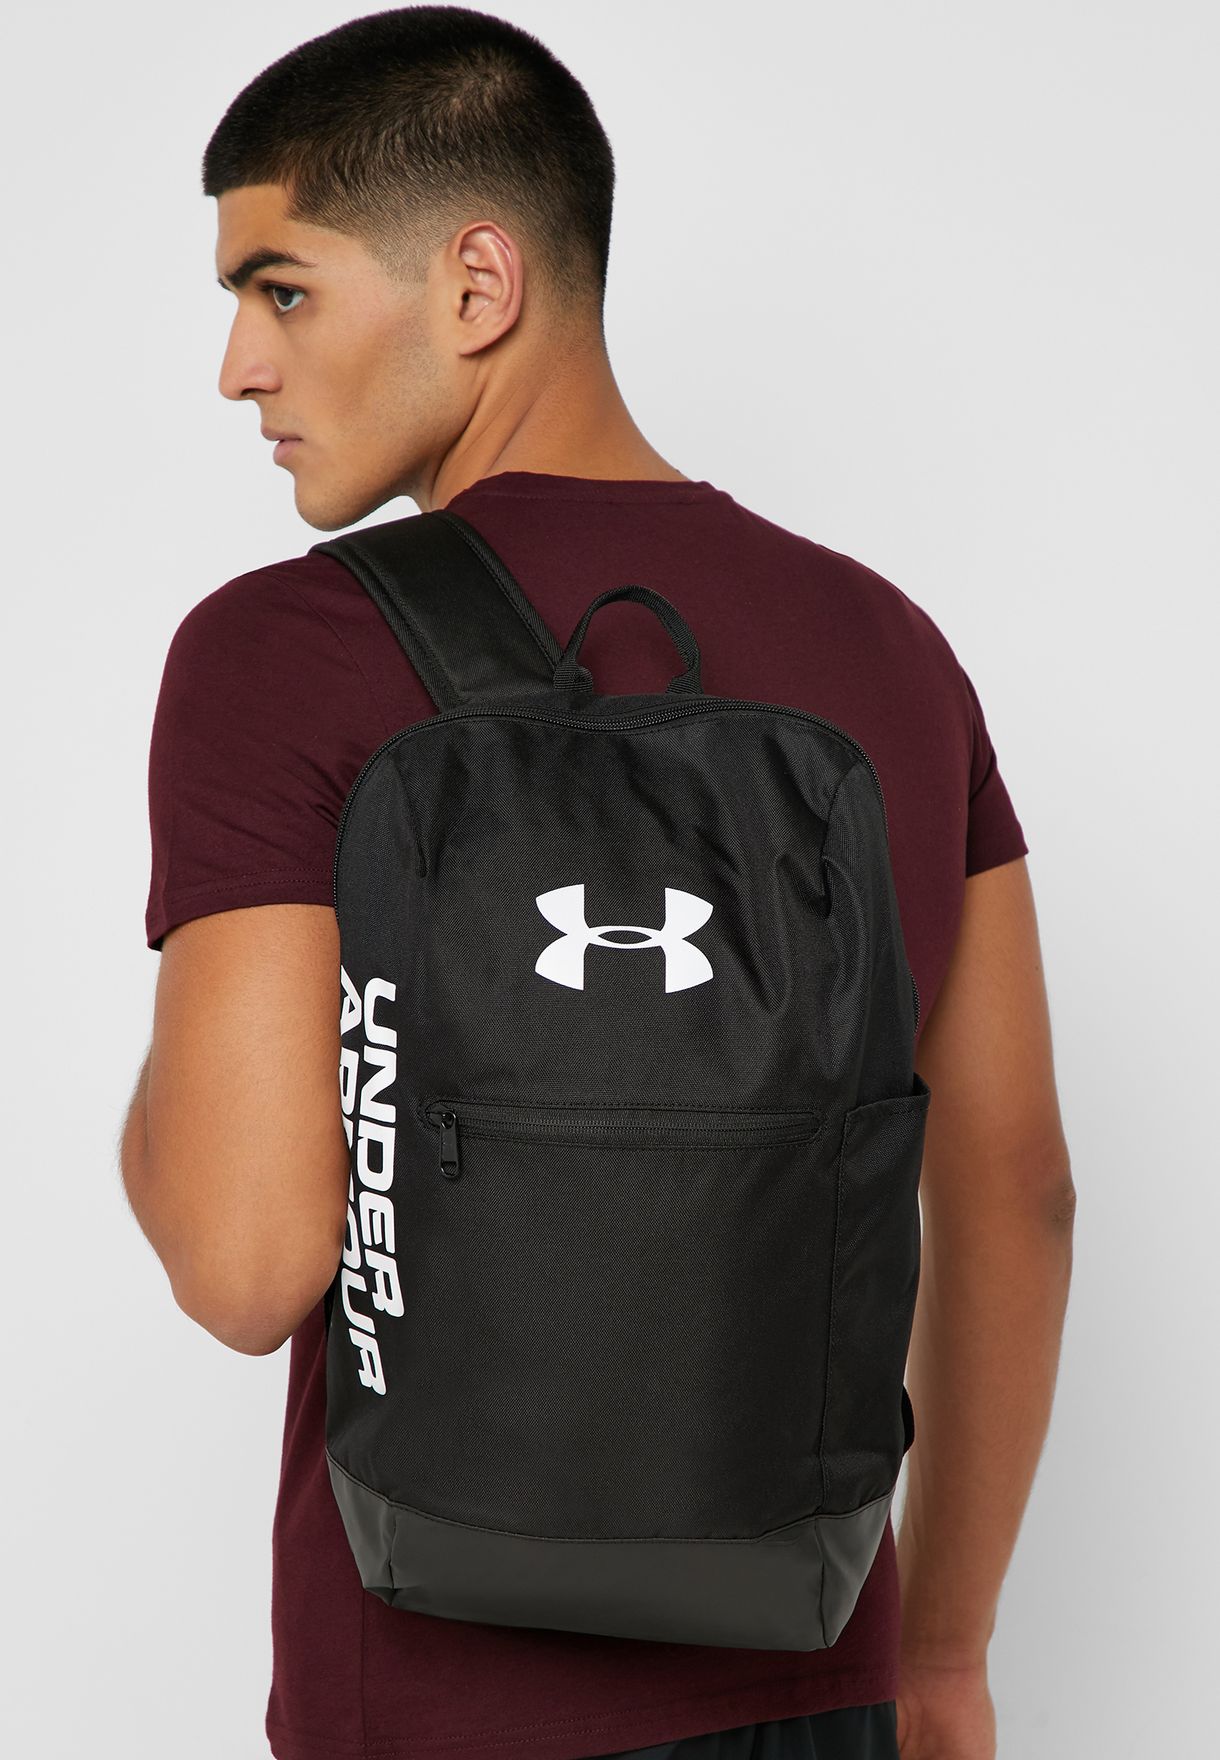 ua patterson backpack review